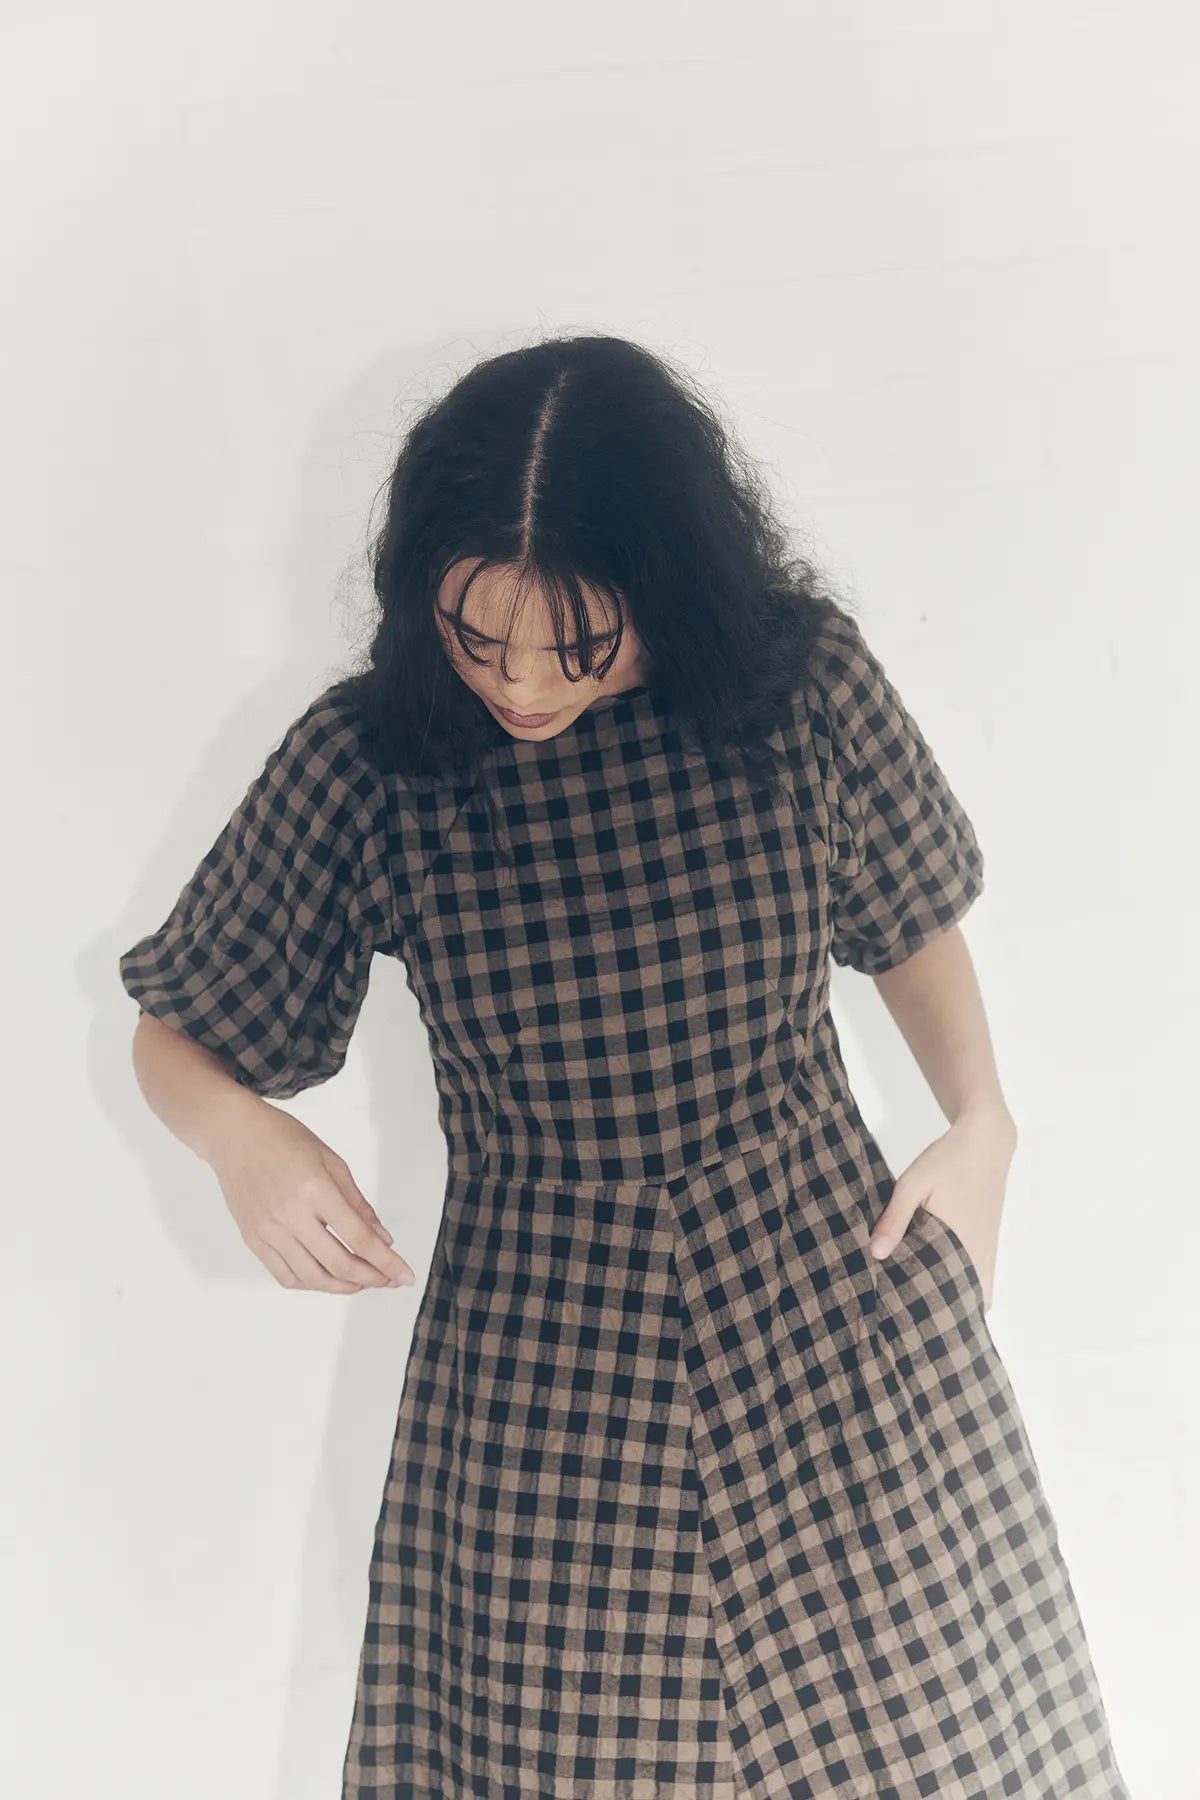 model standing in a line gingham dress colour mocha and black